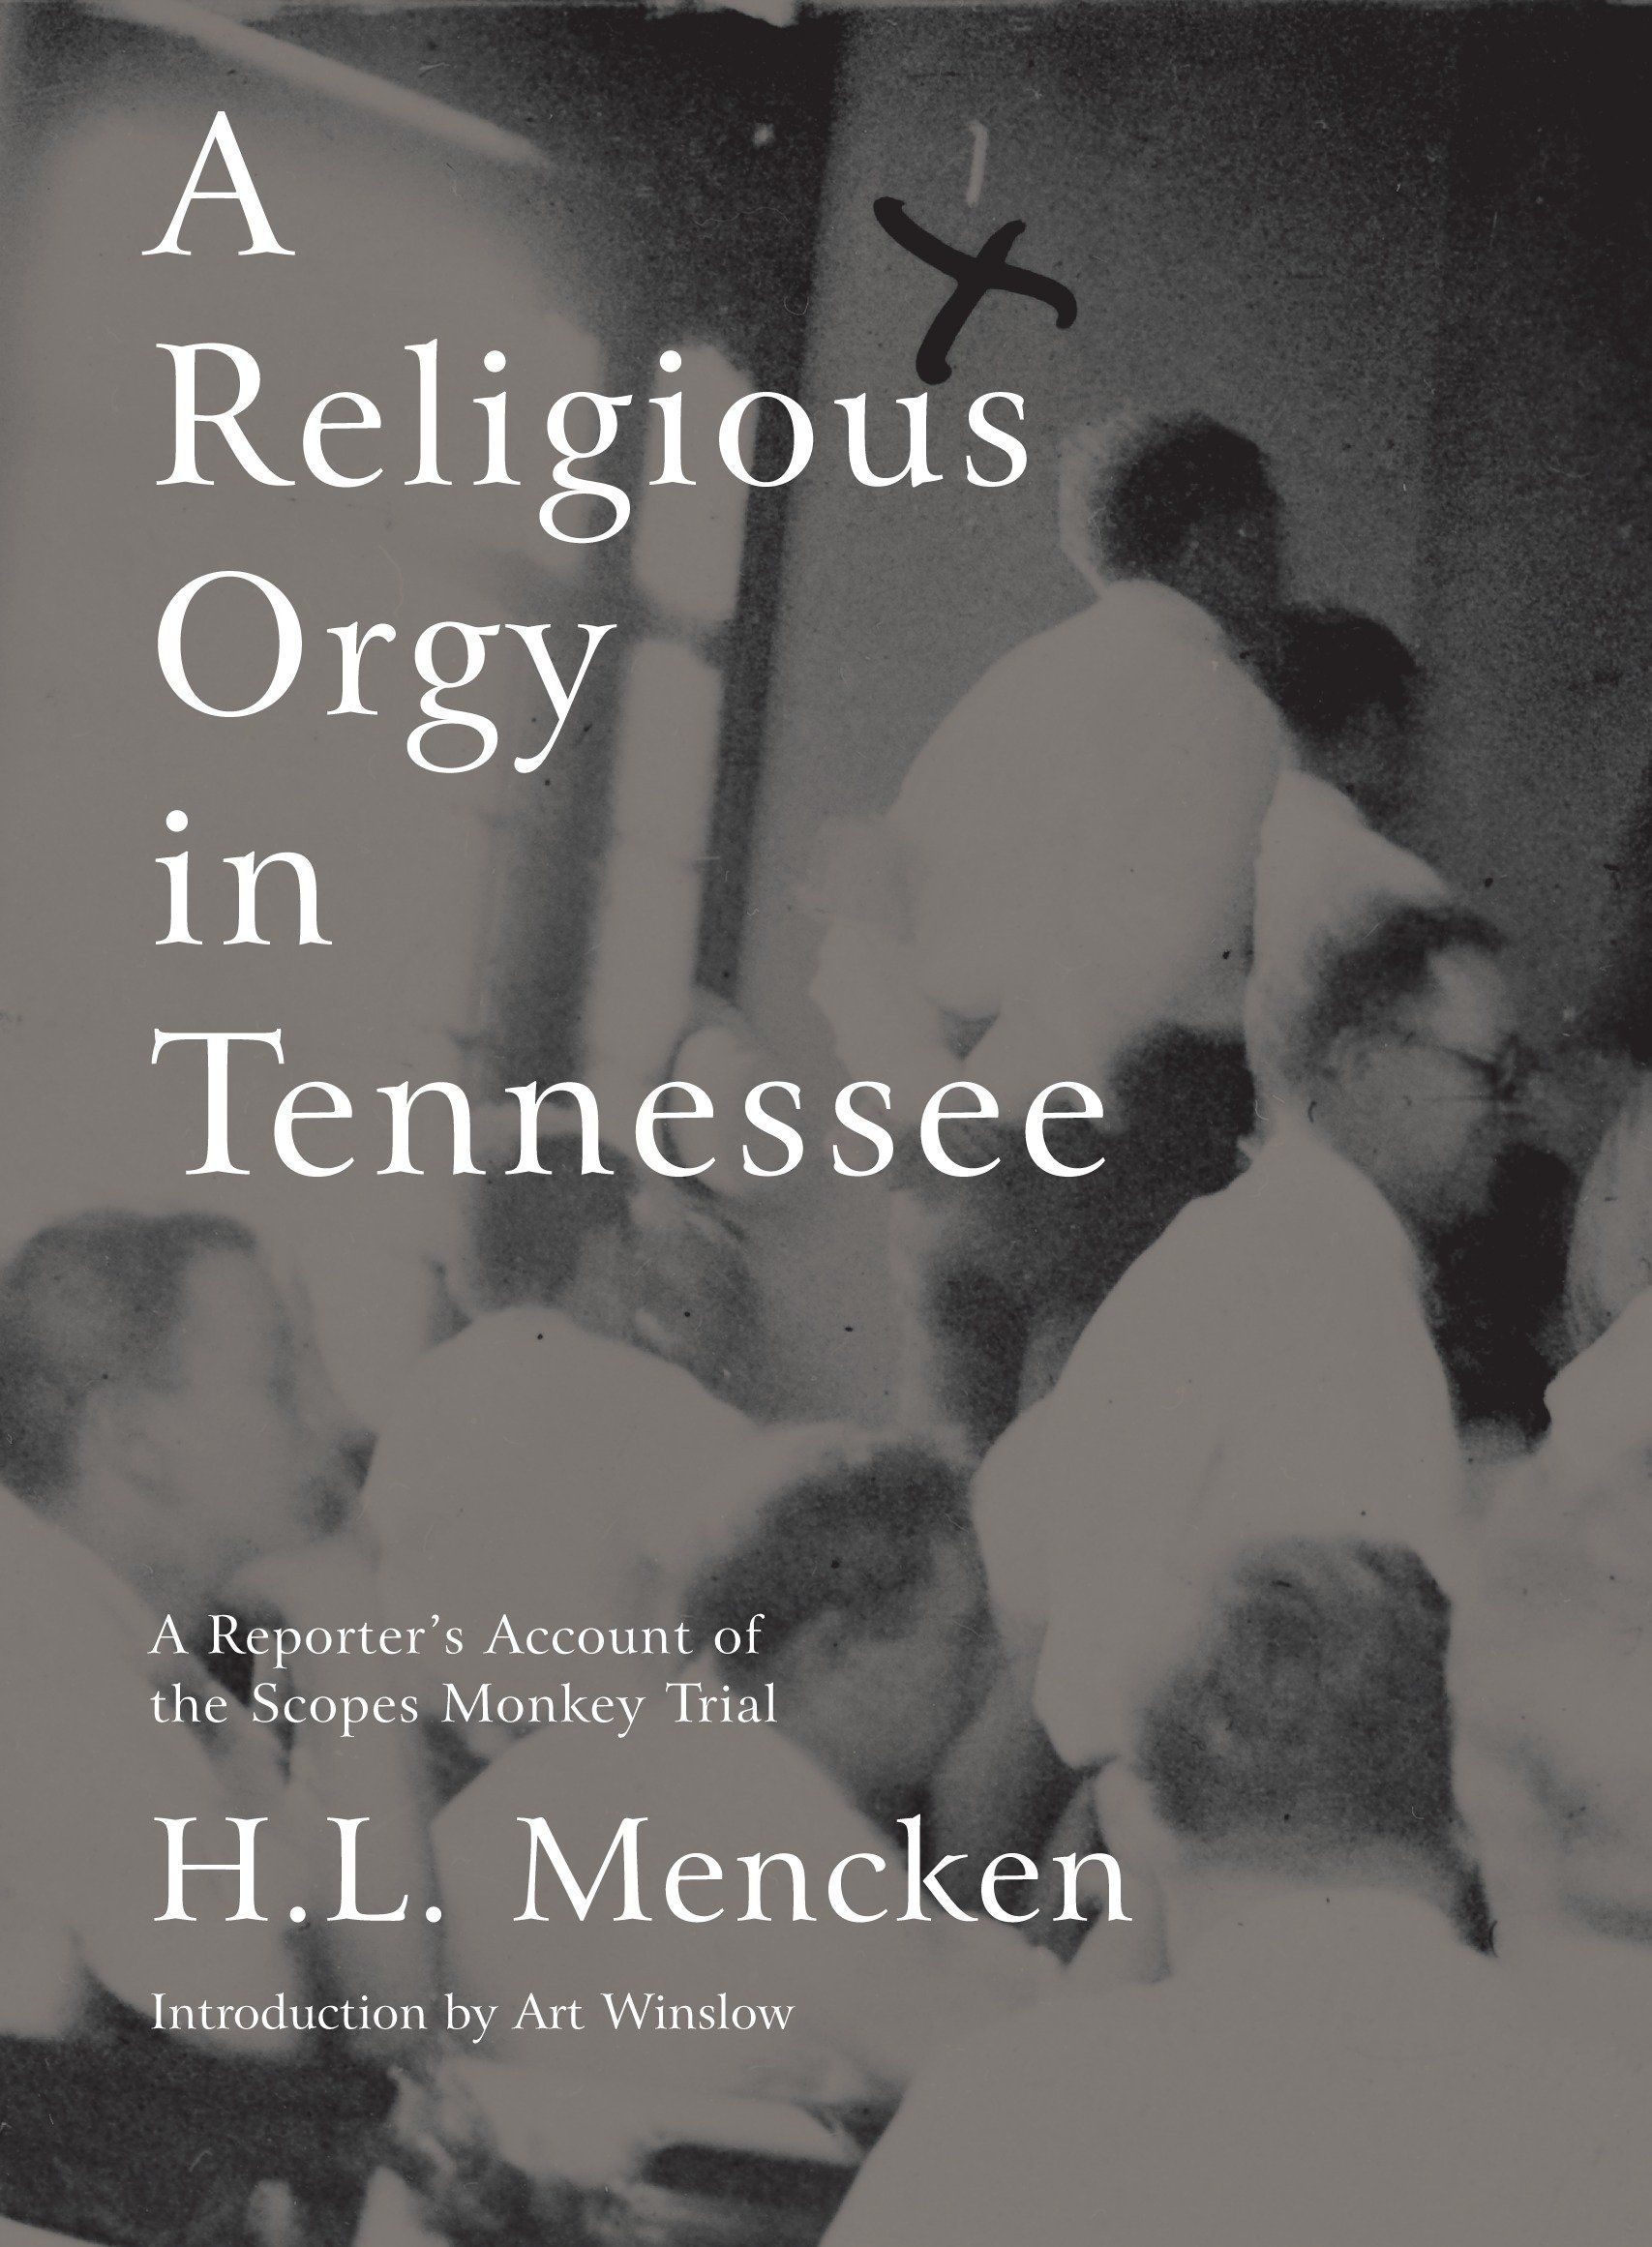 best of Monkey tennessee religious trial scope orgy in reporter Account